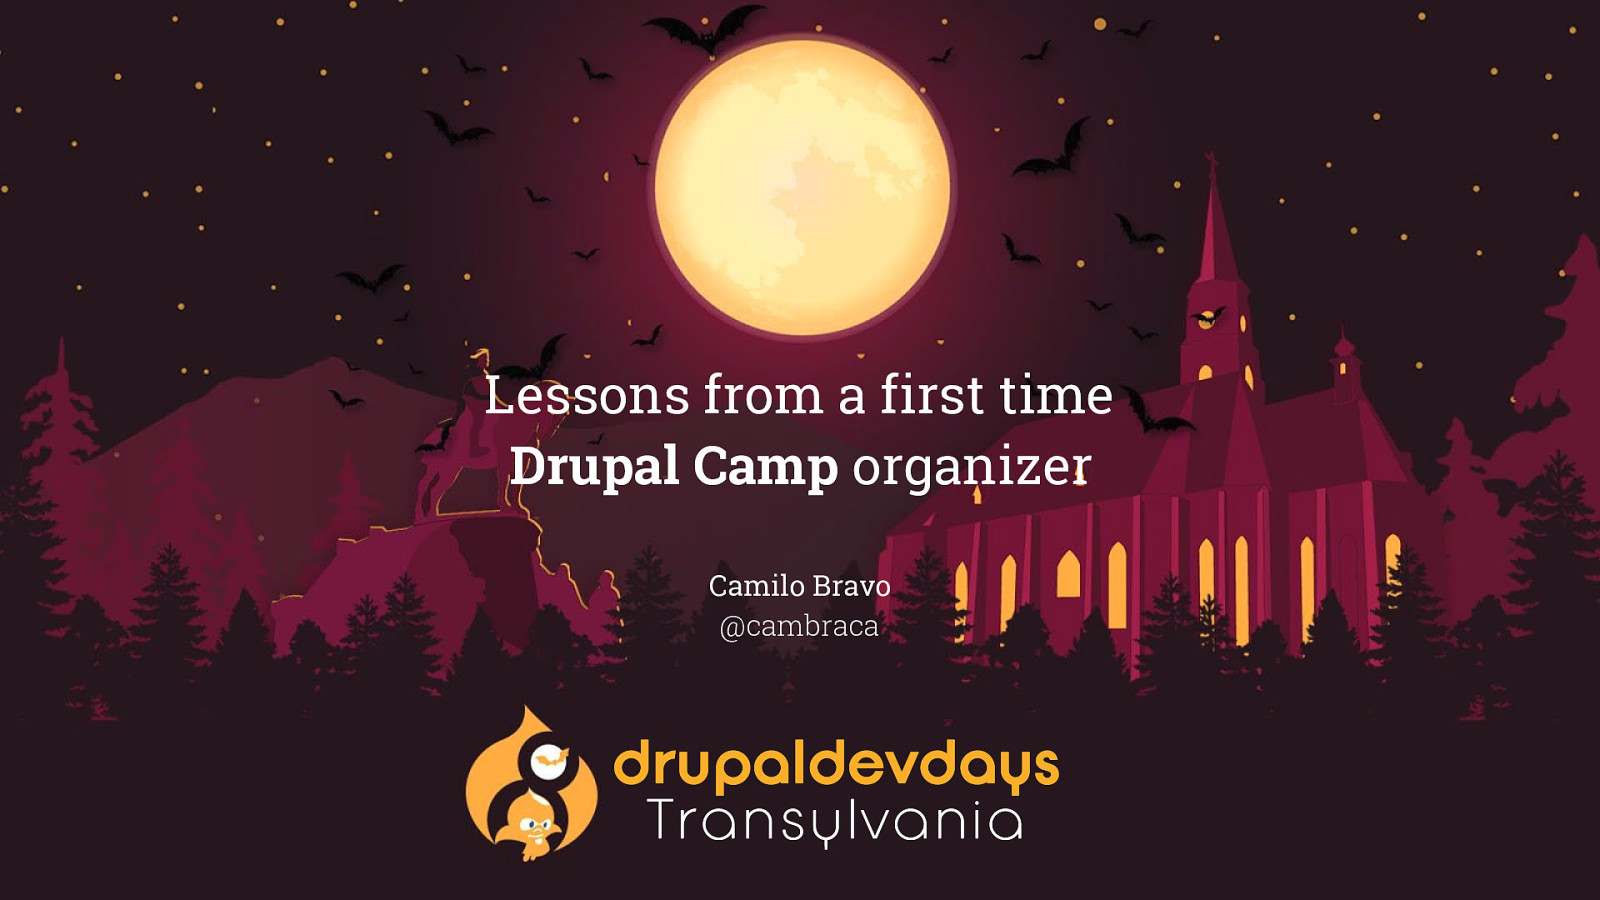 Lessons from a first time Drupal Camp organizer